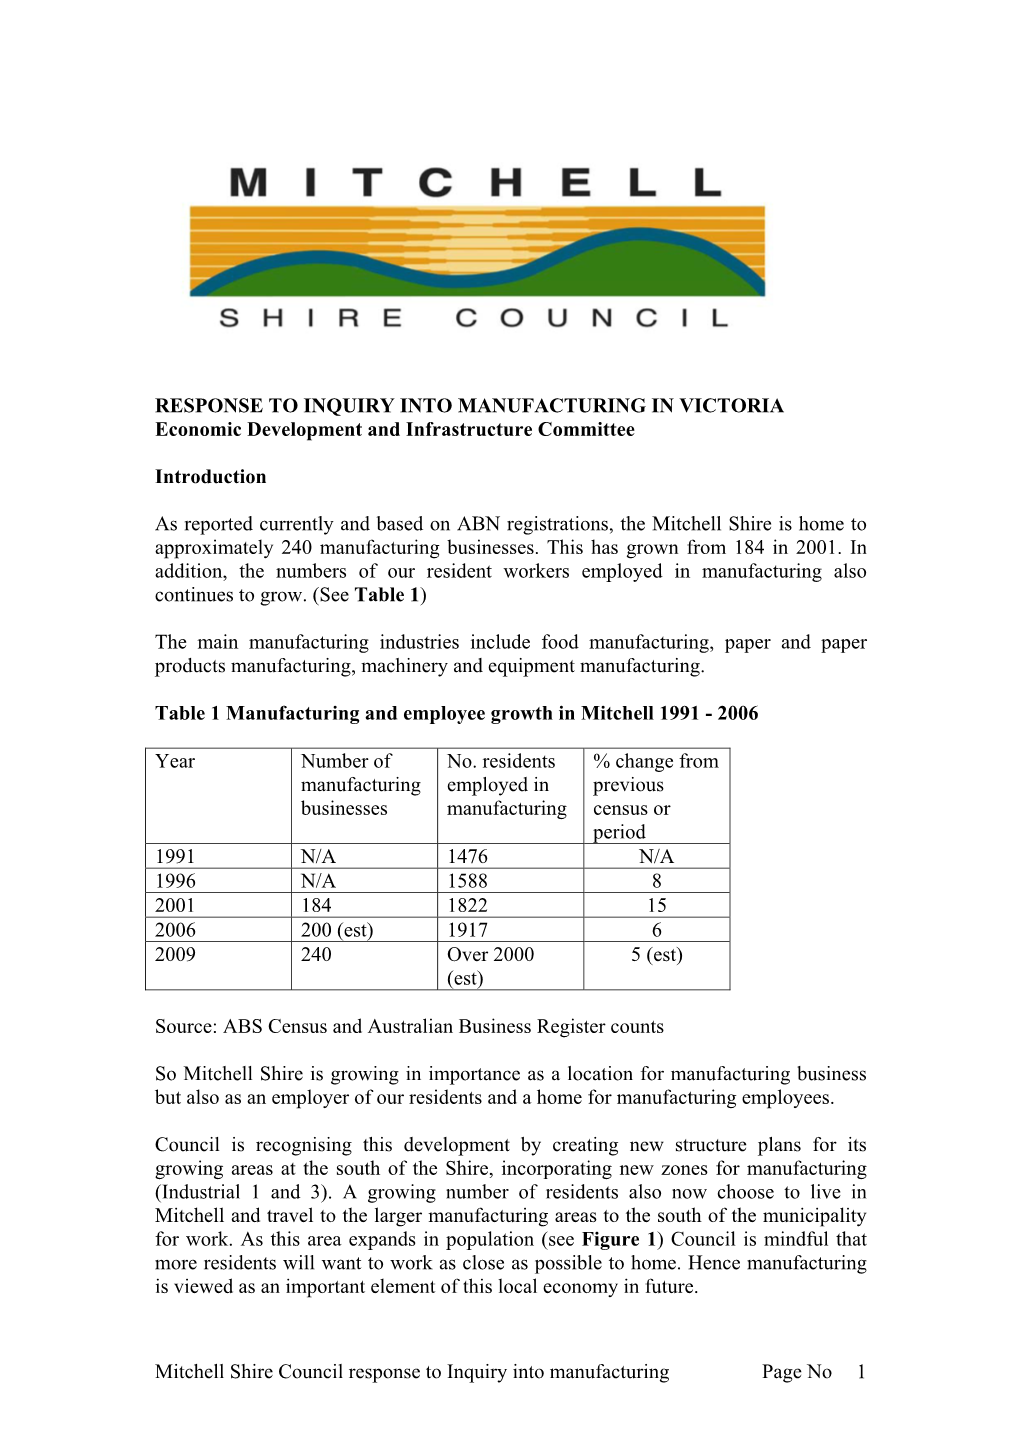 Mitchell Shire Council Response to Inquiry Into Manufacturing Page No 1